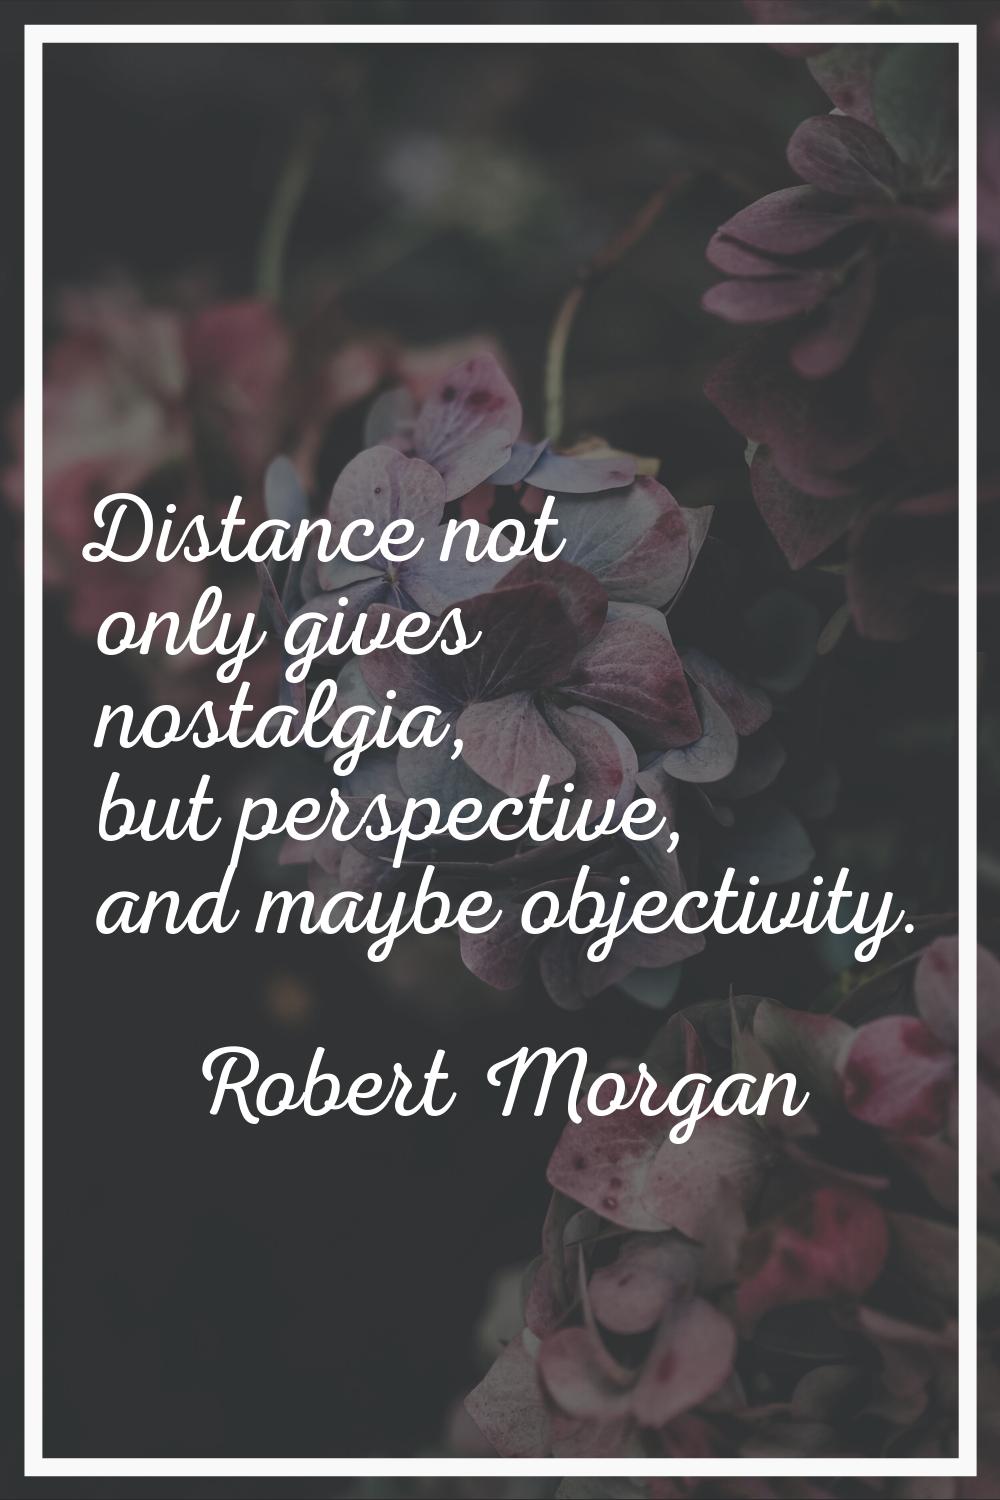 Distance not only gives nostalgia, but perspective, and maybe objectivity.